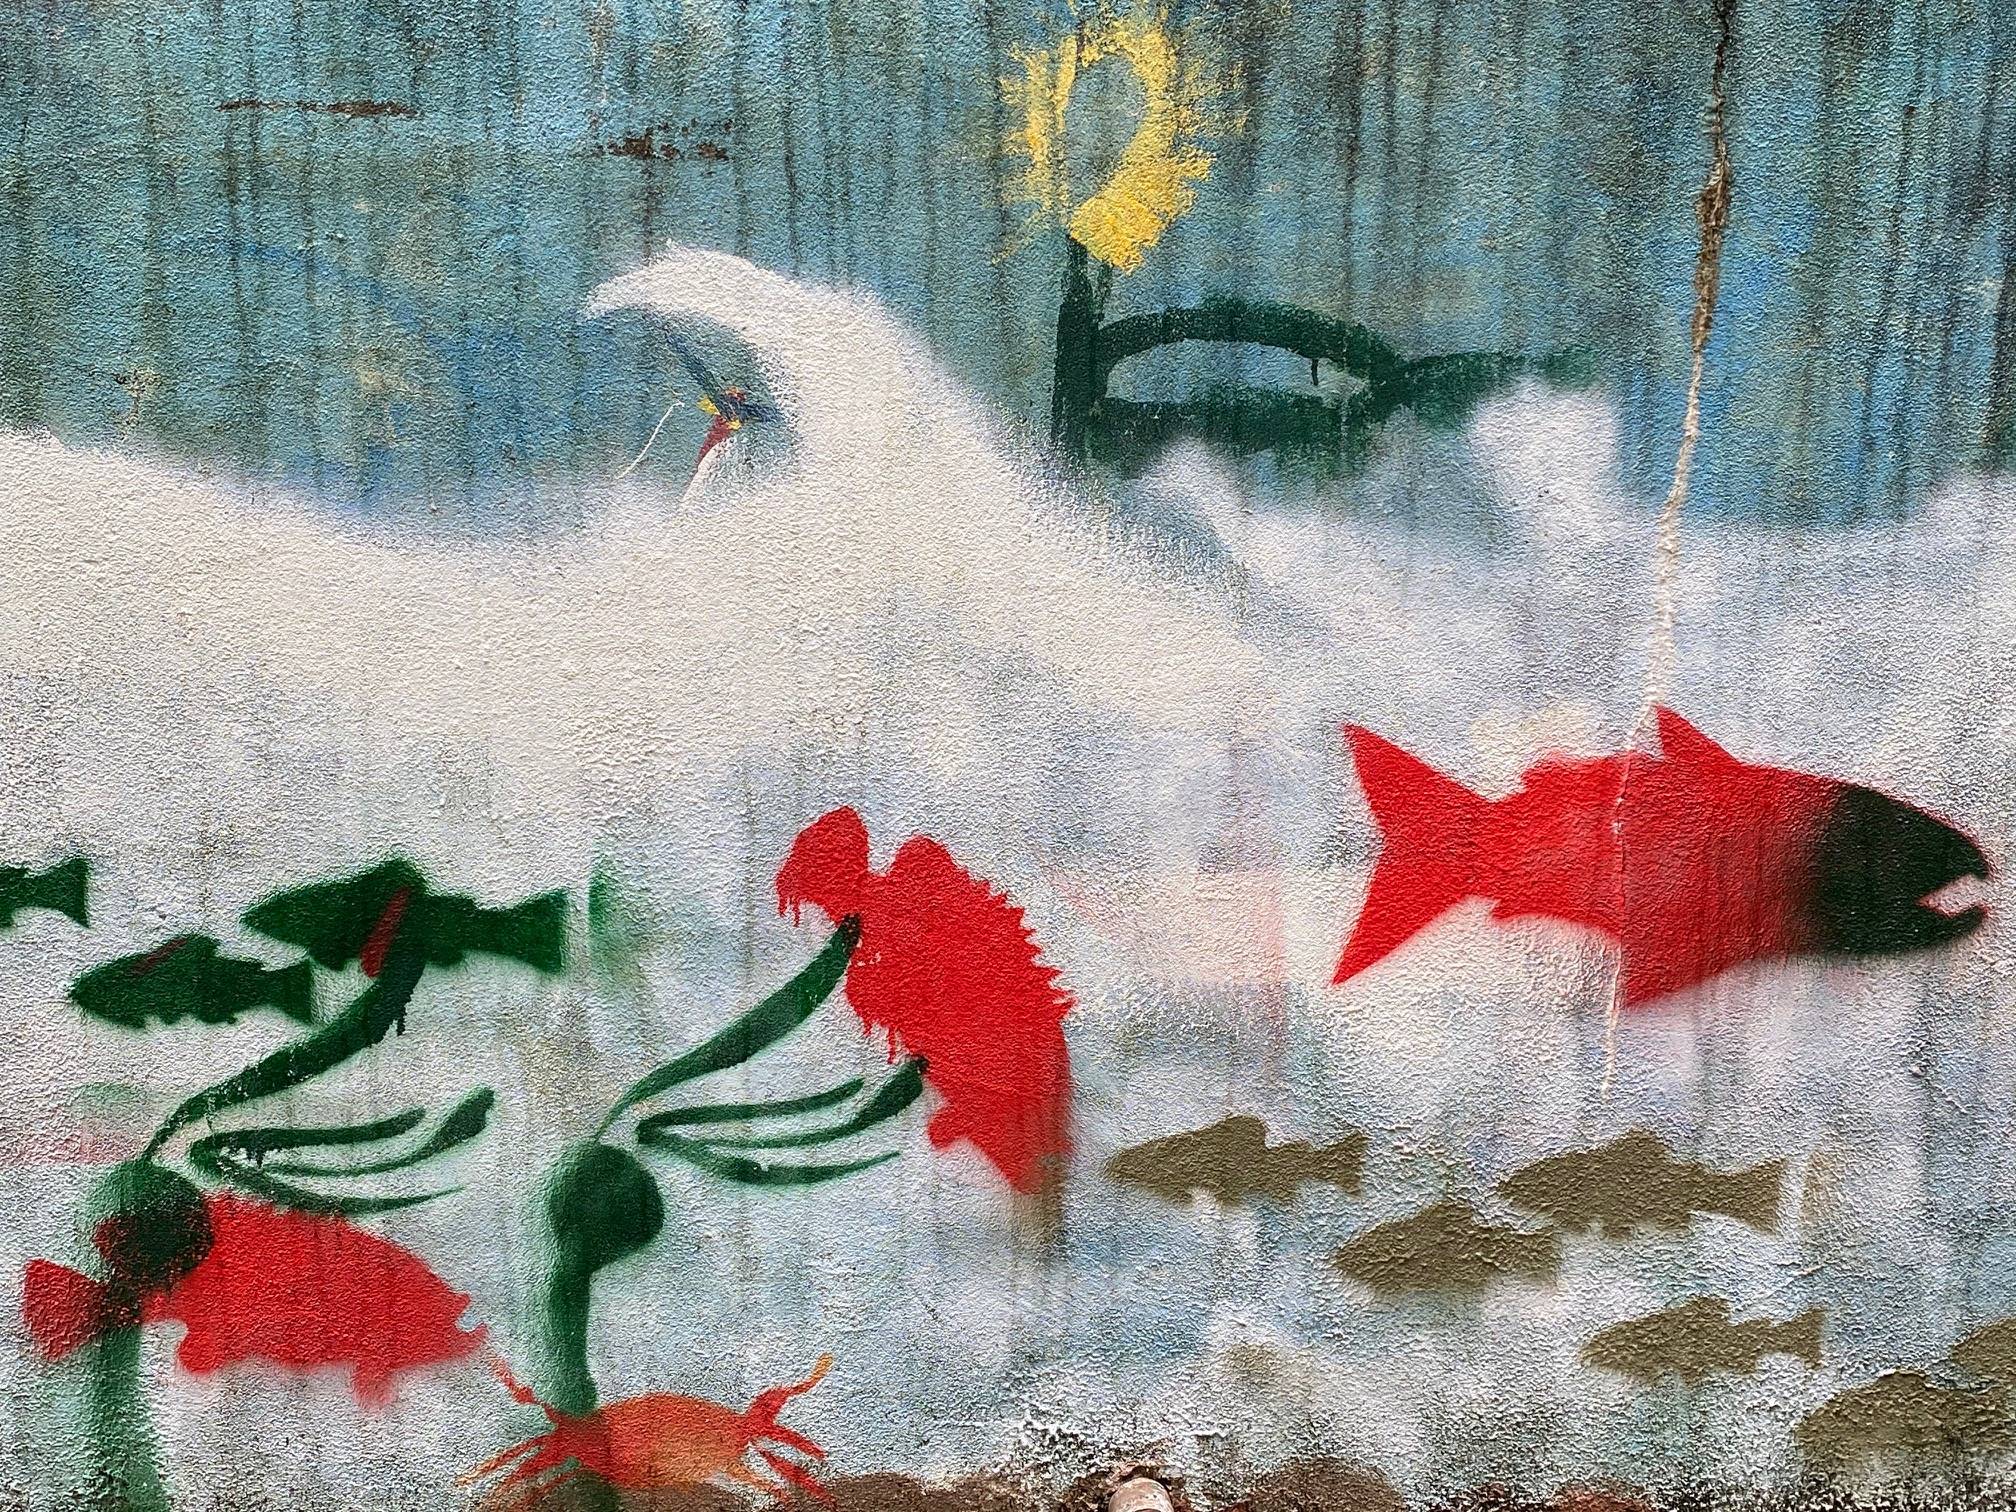 The sun shines on salmon swimming upstream as seen on a retaining wall outside the Juneau Cooperative Preschool on Aug. 12, 2020. (Courtesy Photo / Denise Carroll)